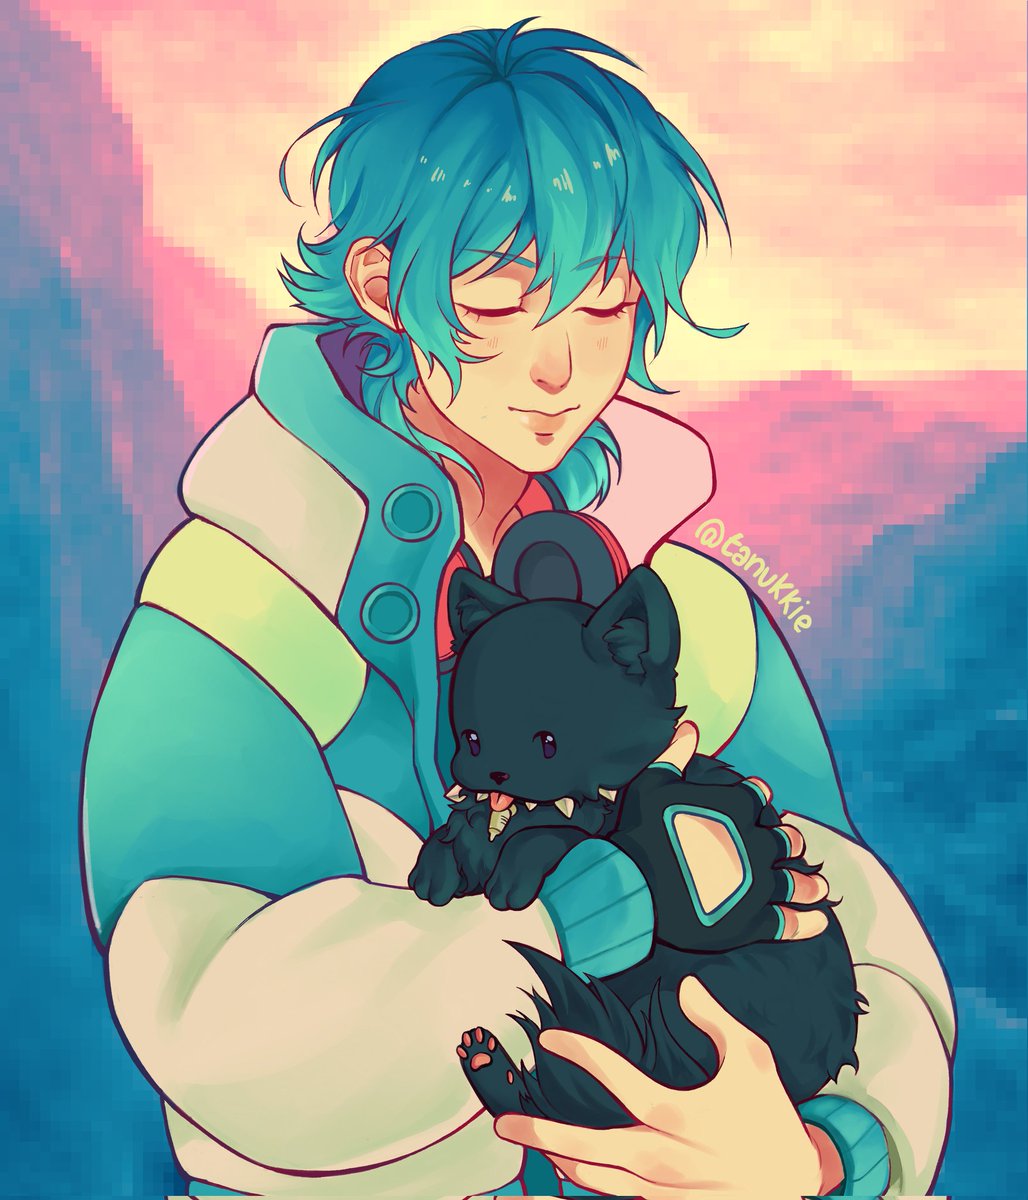 aoba holding ren like jesus holding a little lamb (i might be too late for this trend idk) #dmmd #DramaticalMurder #arttwt